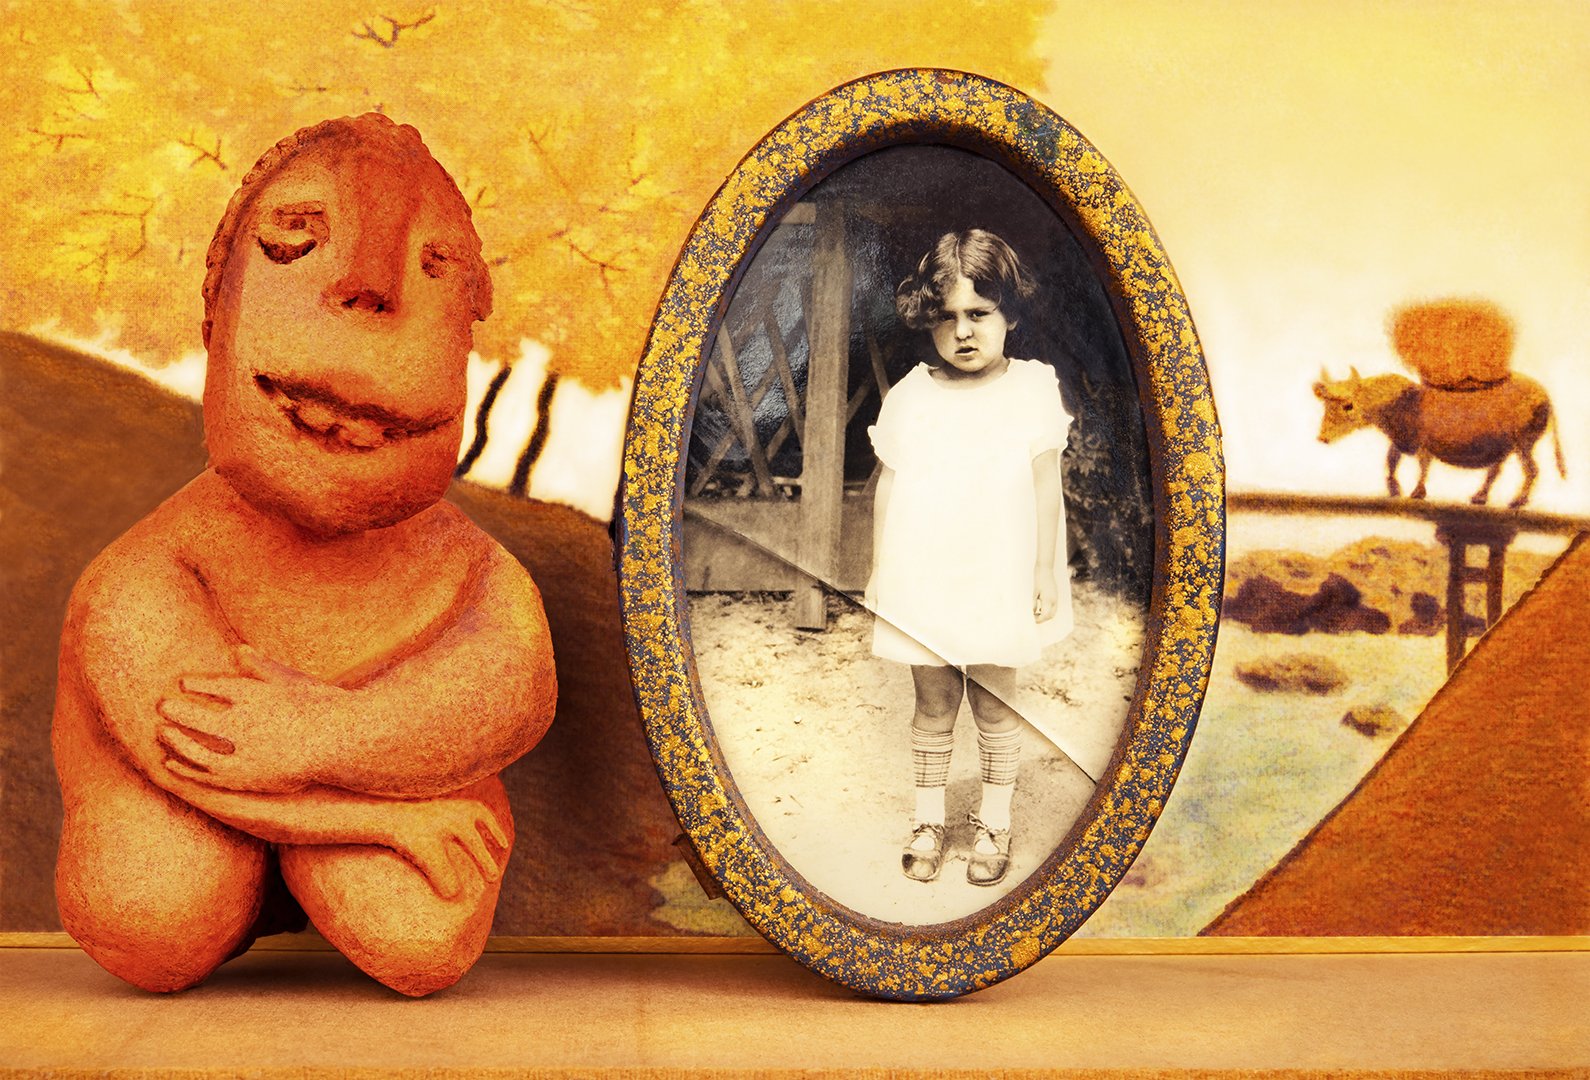    Chance Encounters    An Imaginary Journey: A Girl &amp; Her Friend ‘Clay’ with an Asian Backdrop  2023 (The backdrop is a found object) 64cm x 94cm Archival pigment print  on 310gsm cotton rag    